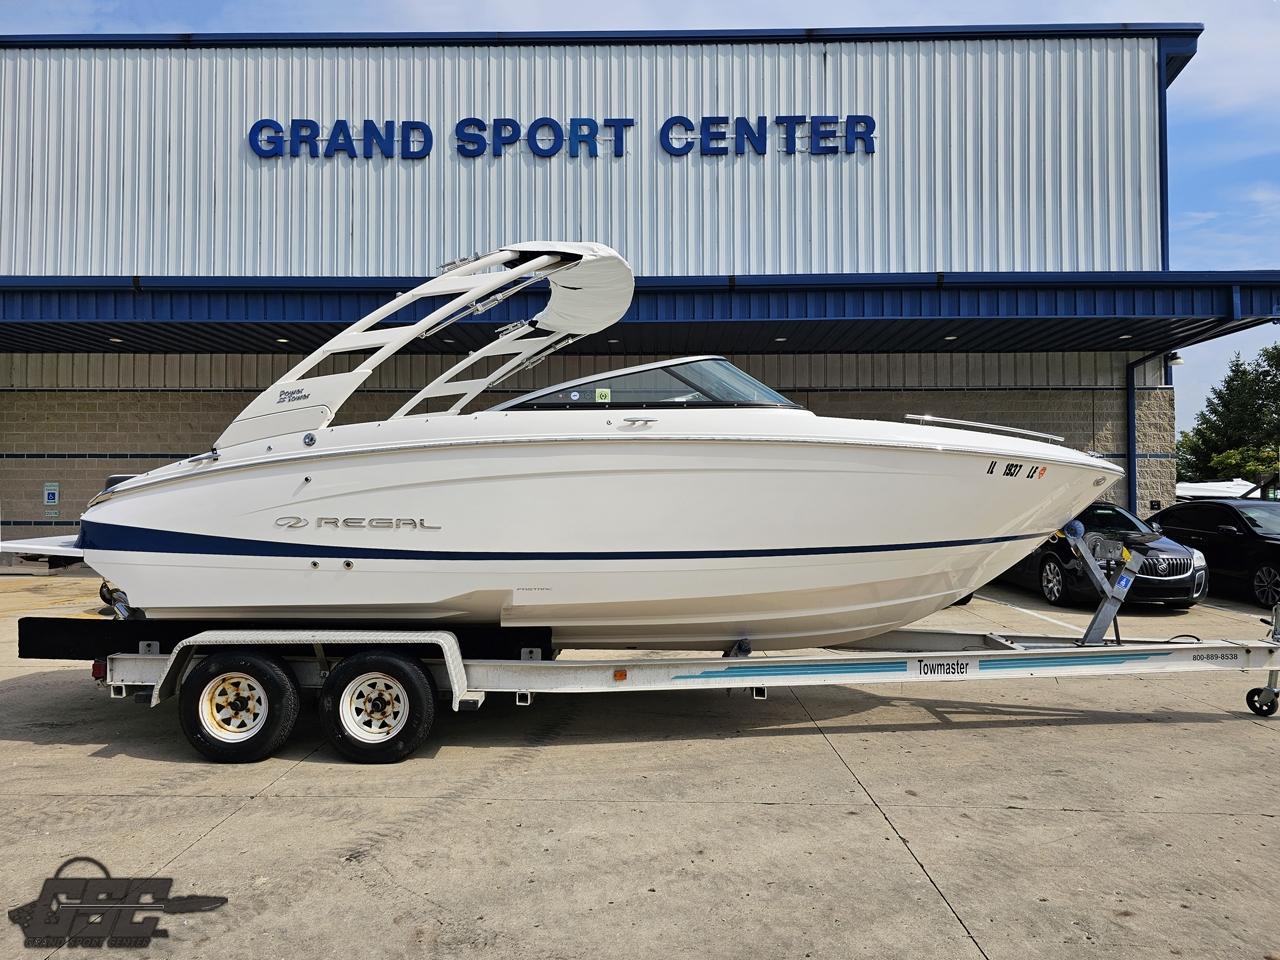 Regal 25 Rx Bowrider boats for sale - Boat Trader